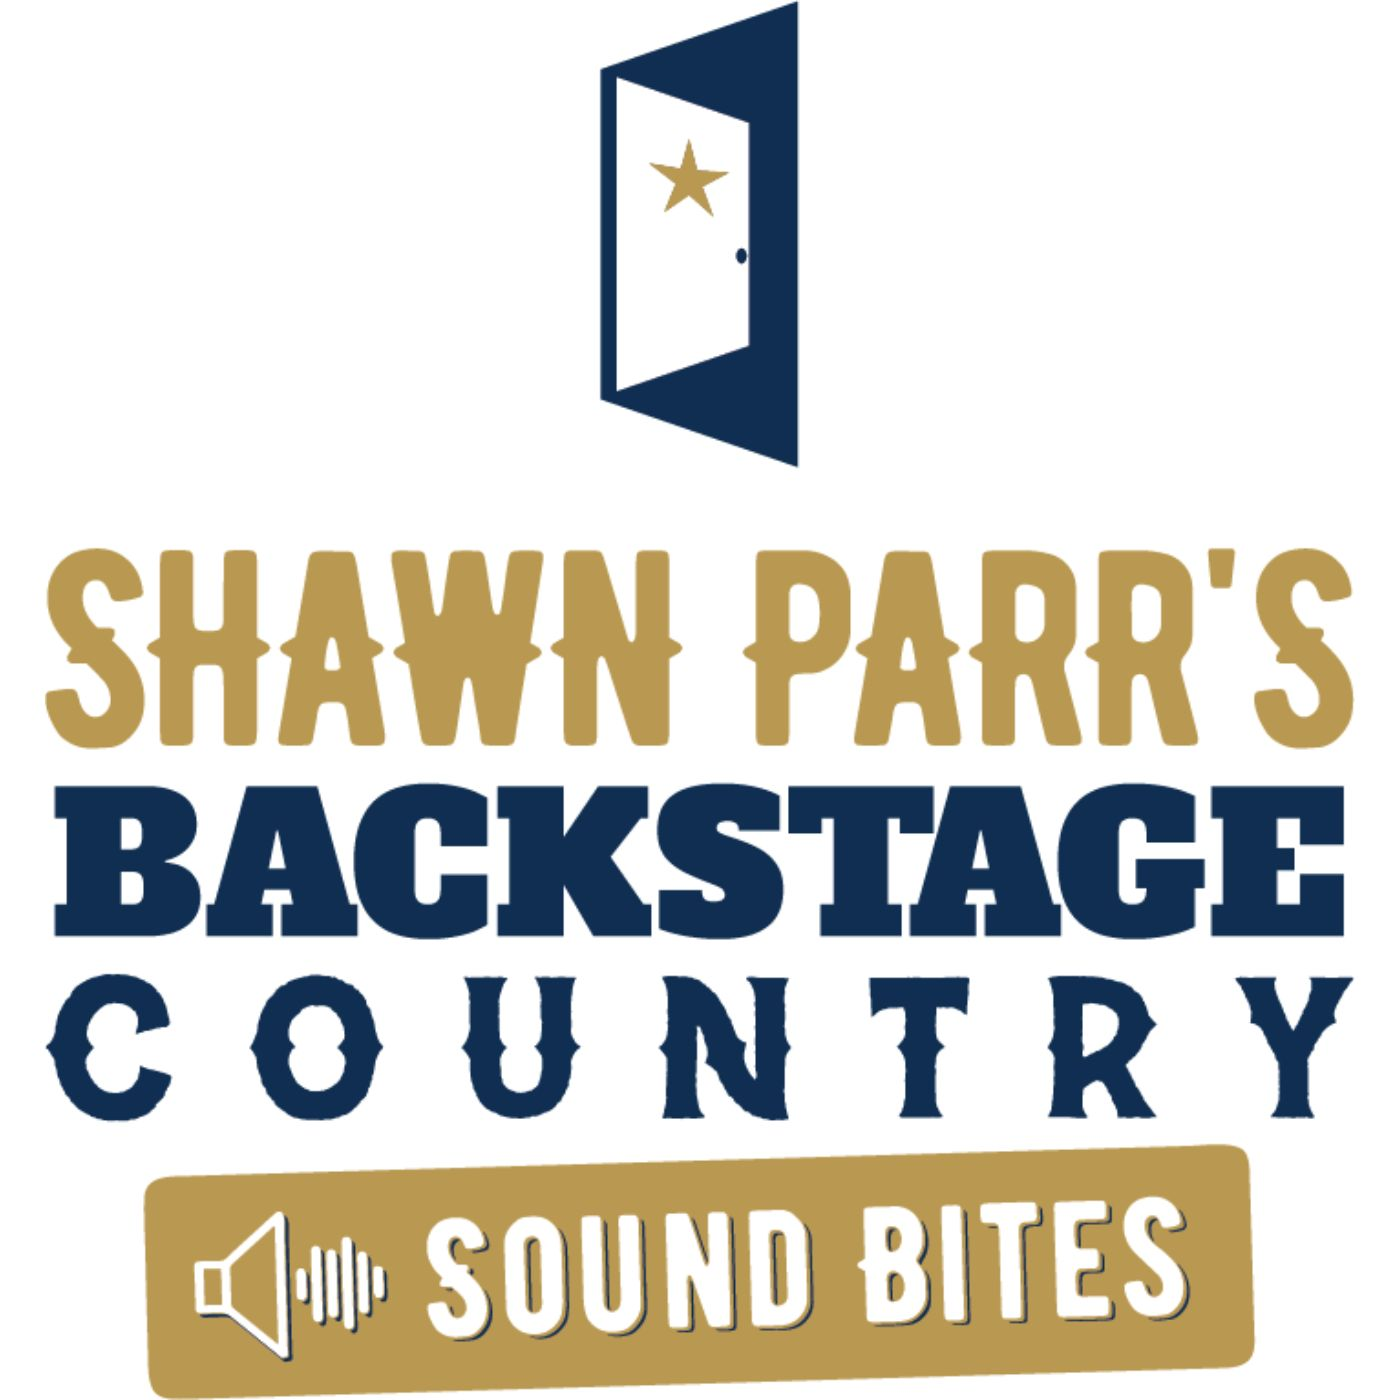 Dan + Shay Tell Shawn Parr About the 1st Time They Heard Themselves on the Radio